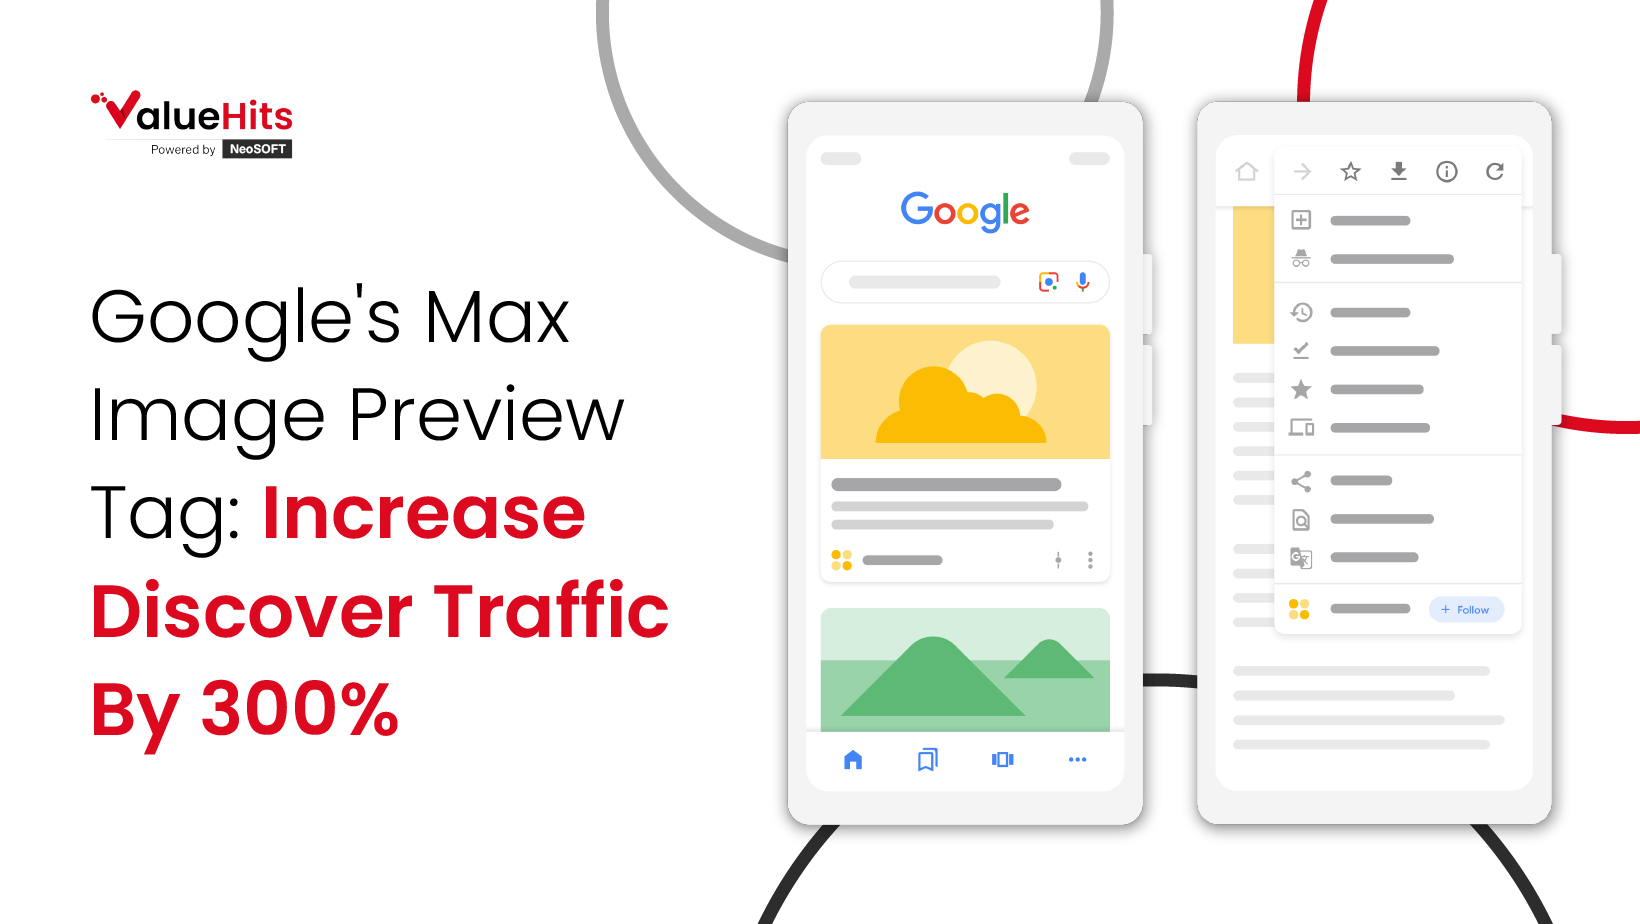 Googles-Max-Image-Preview-Tag-Increase-Discover-Traffic-By-300